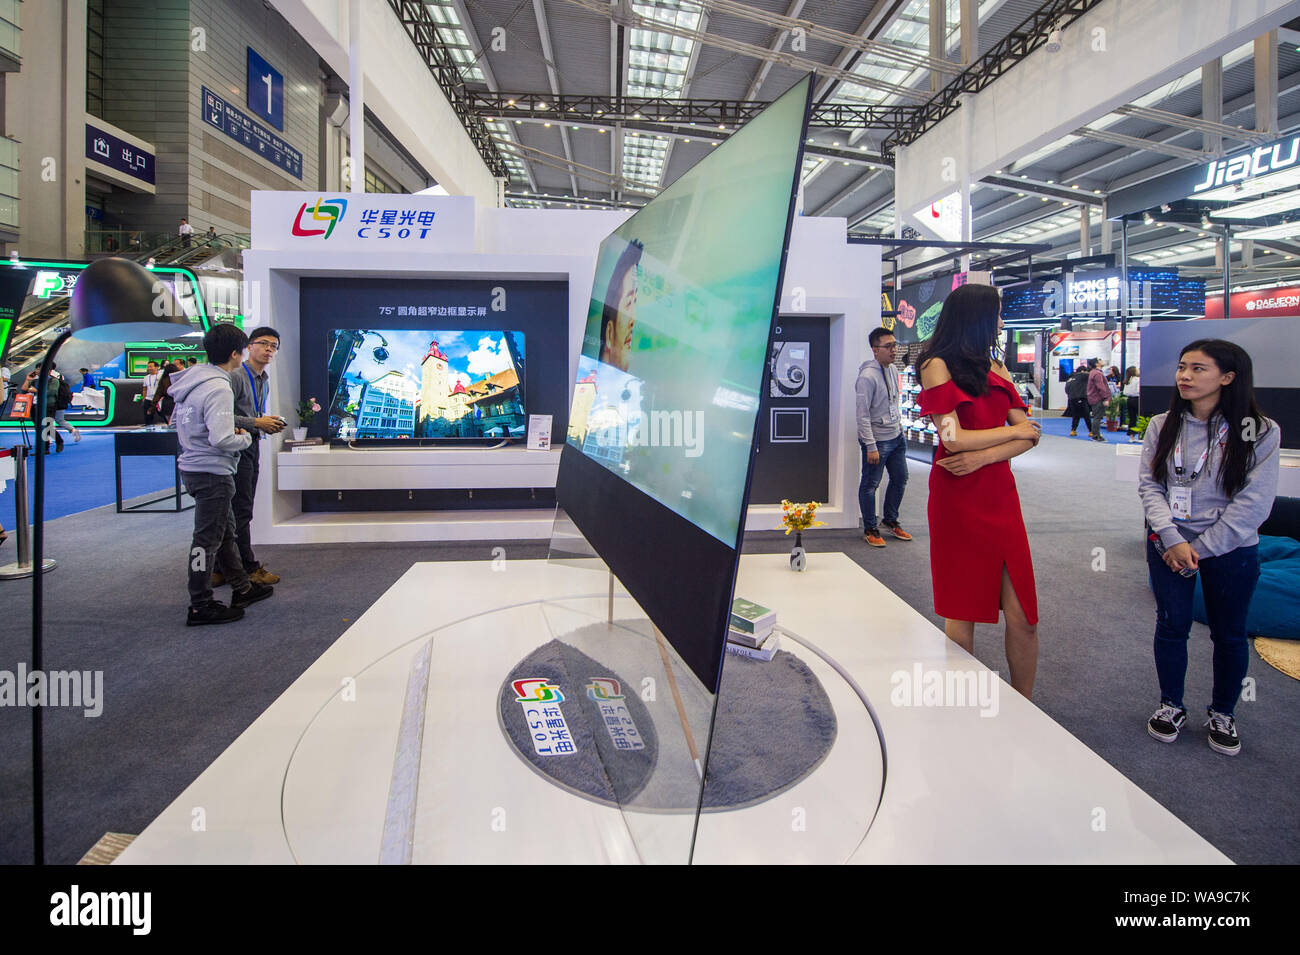 FILE--People visit the stand of Shenzhen China Star Optoelectronics Technology  Co Ltd (CSOT) in Shenzhen city, south China's Guangdong province, 14  November 2018. Behind Guangdong's thriving electronics industry are an  array of